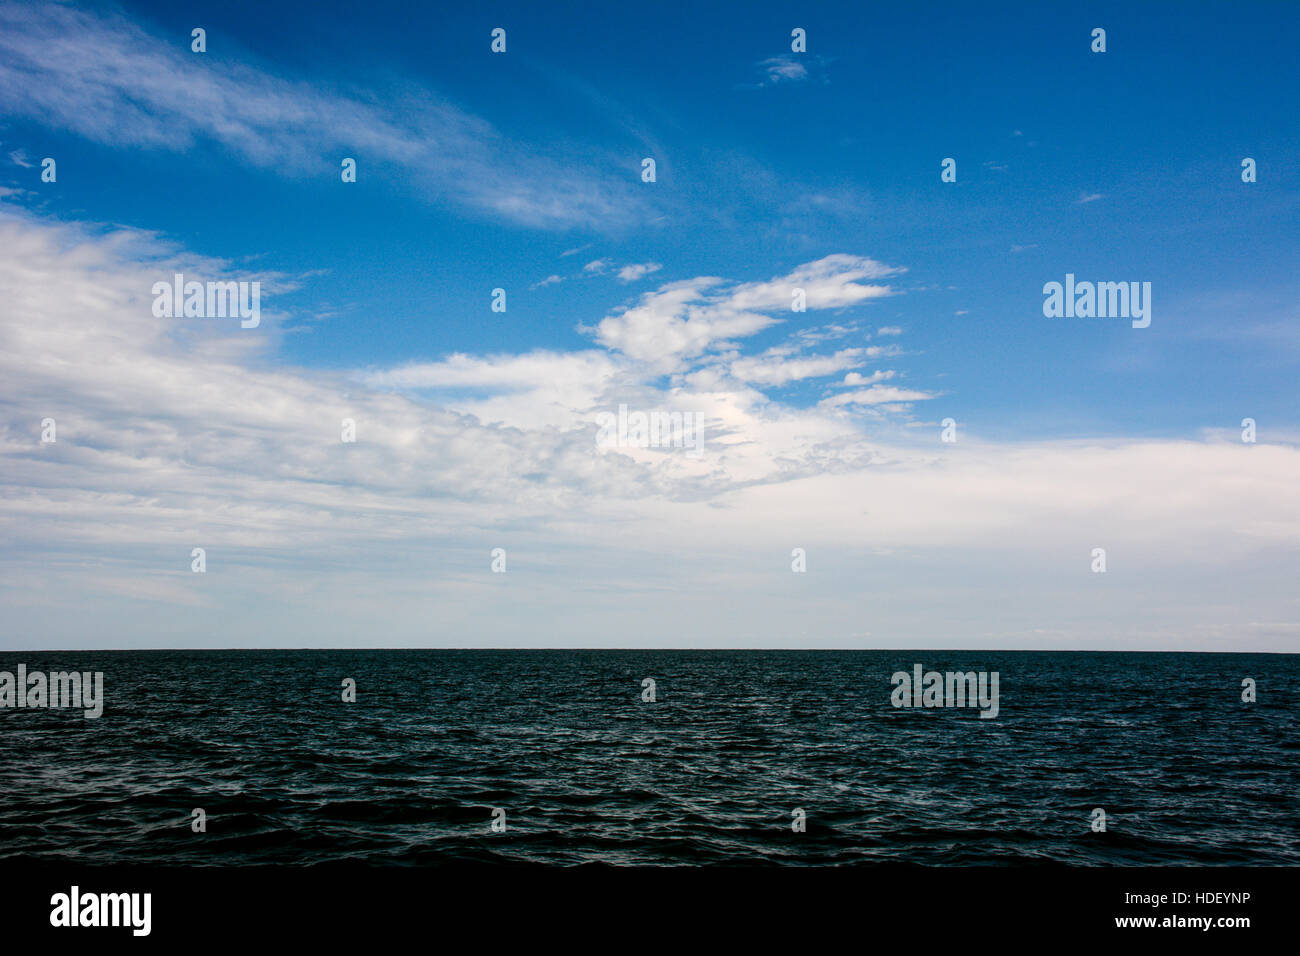 Patterned white clouds in a blue sky over a rippled azure sea. Stock Photo